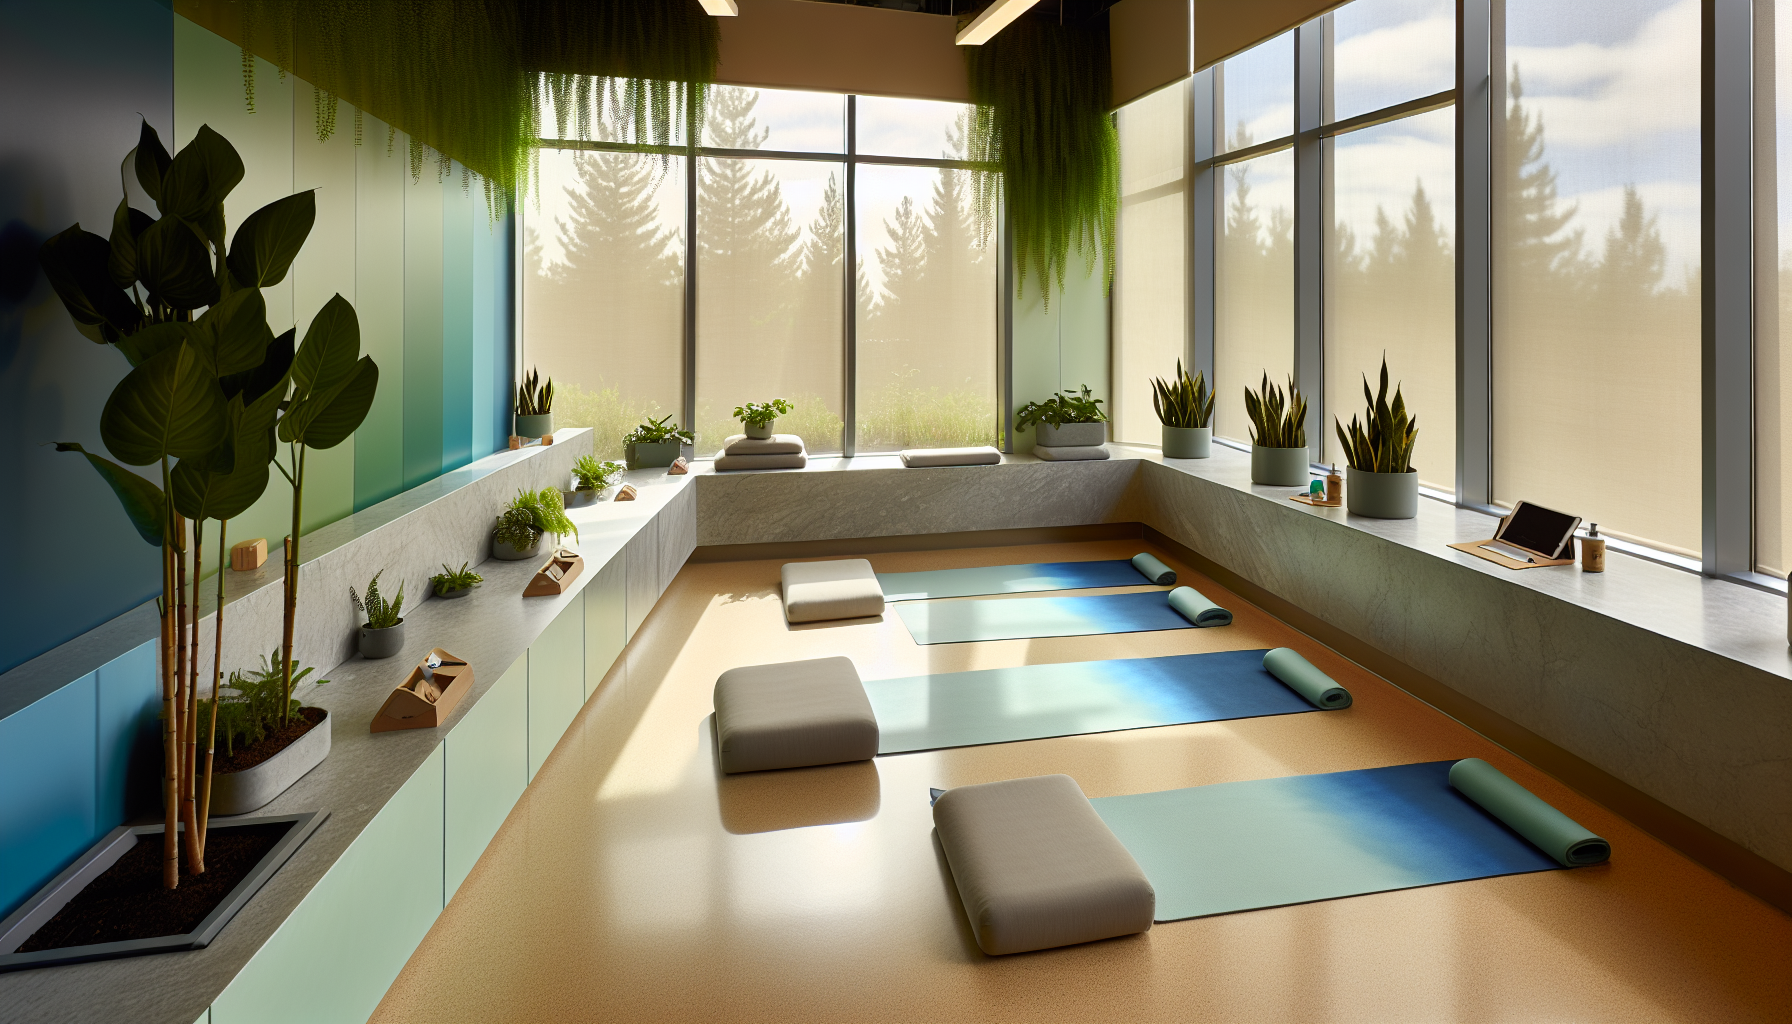 A serene wellness room with yoga mats, promoting work-life balance for employees in Palo Alto